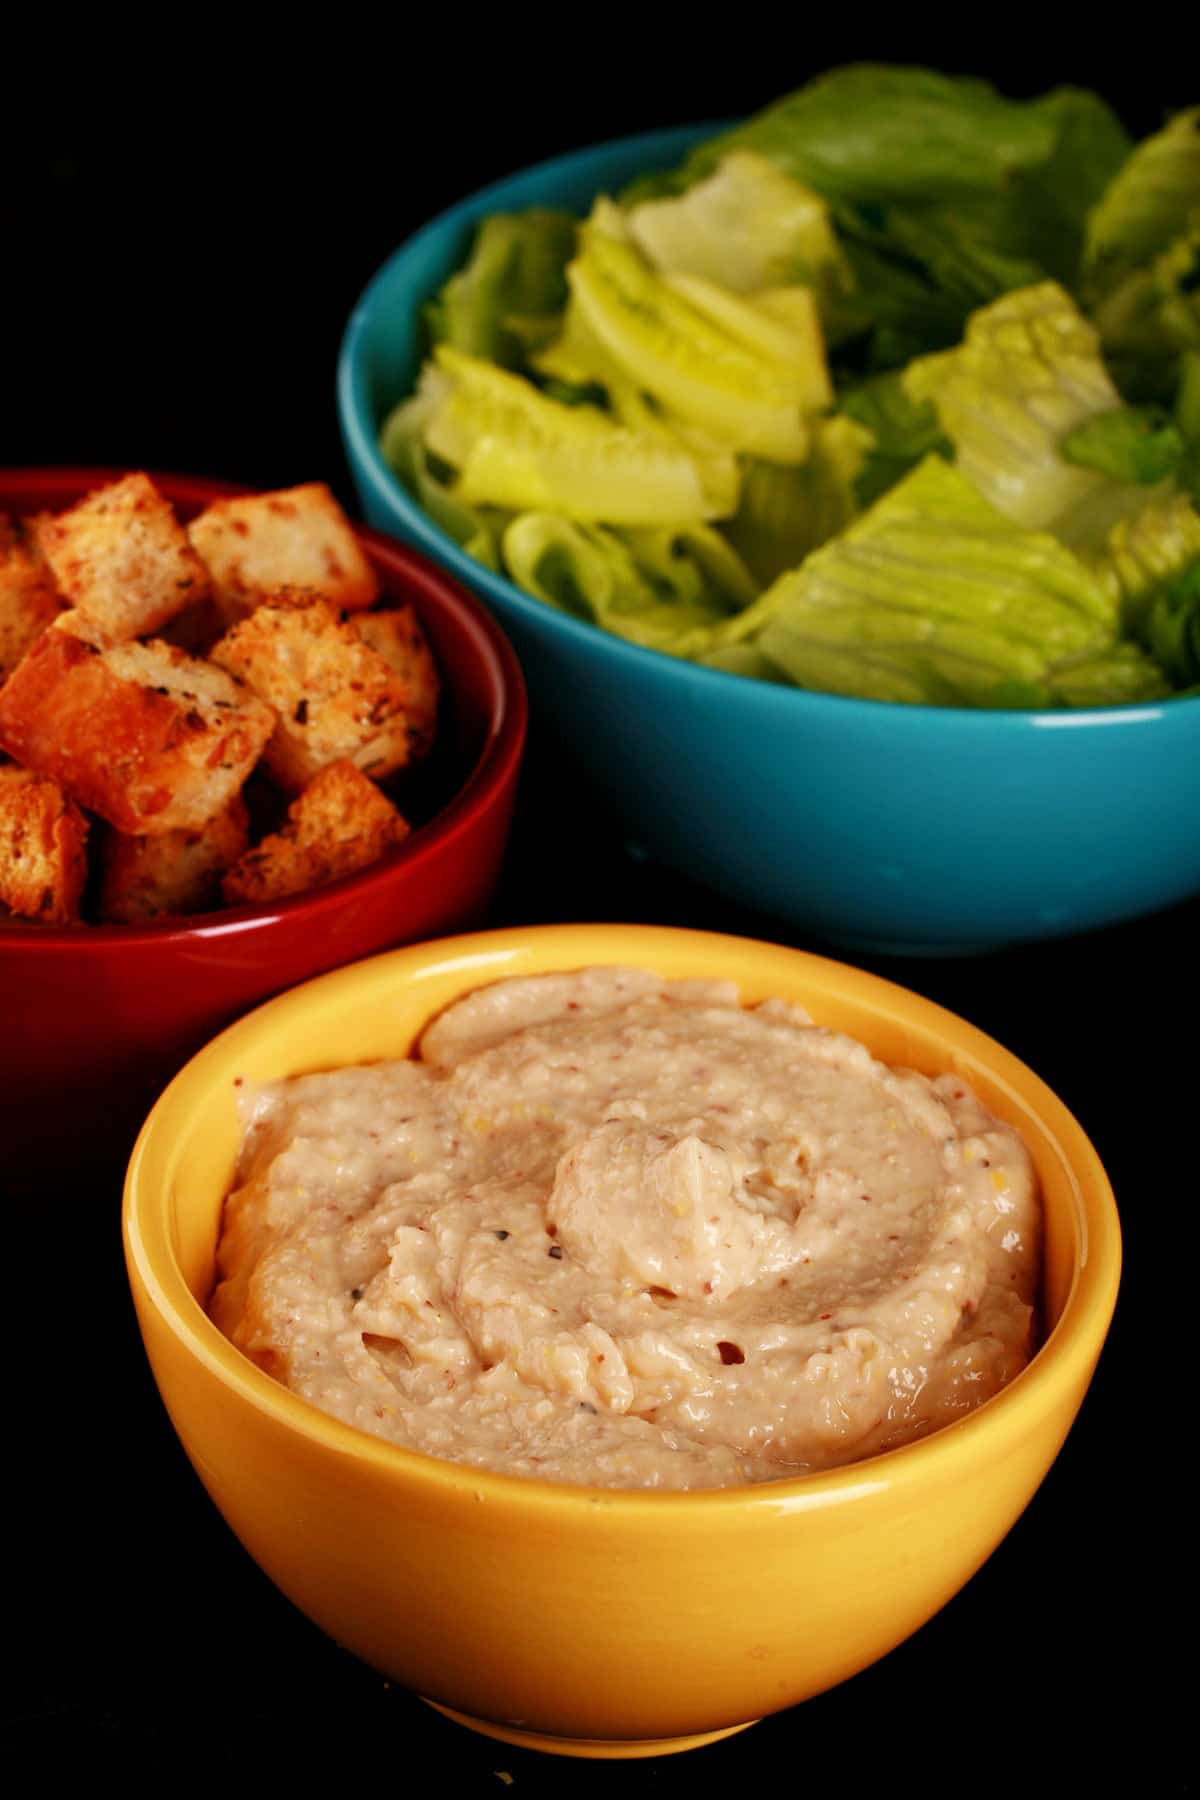 A large blue bowl full of chopped romaine lettuce, a yellow bowl of "extreme" Caesar salad, and a red bowl full of homemade croutons.